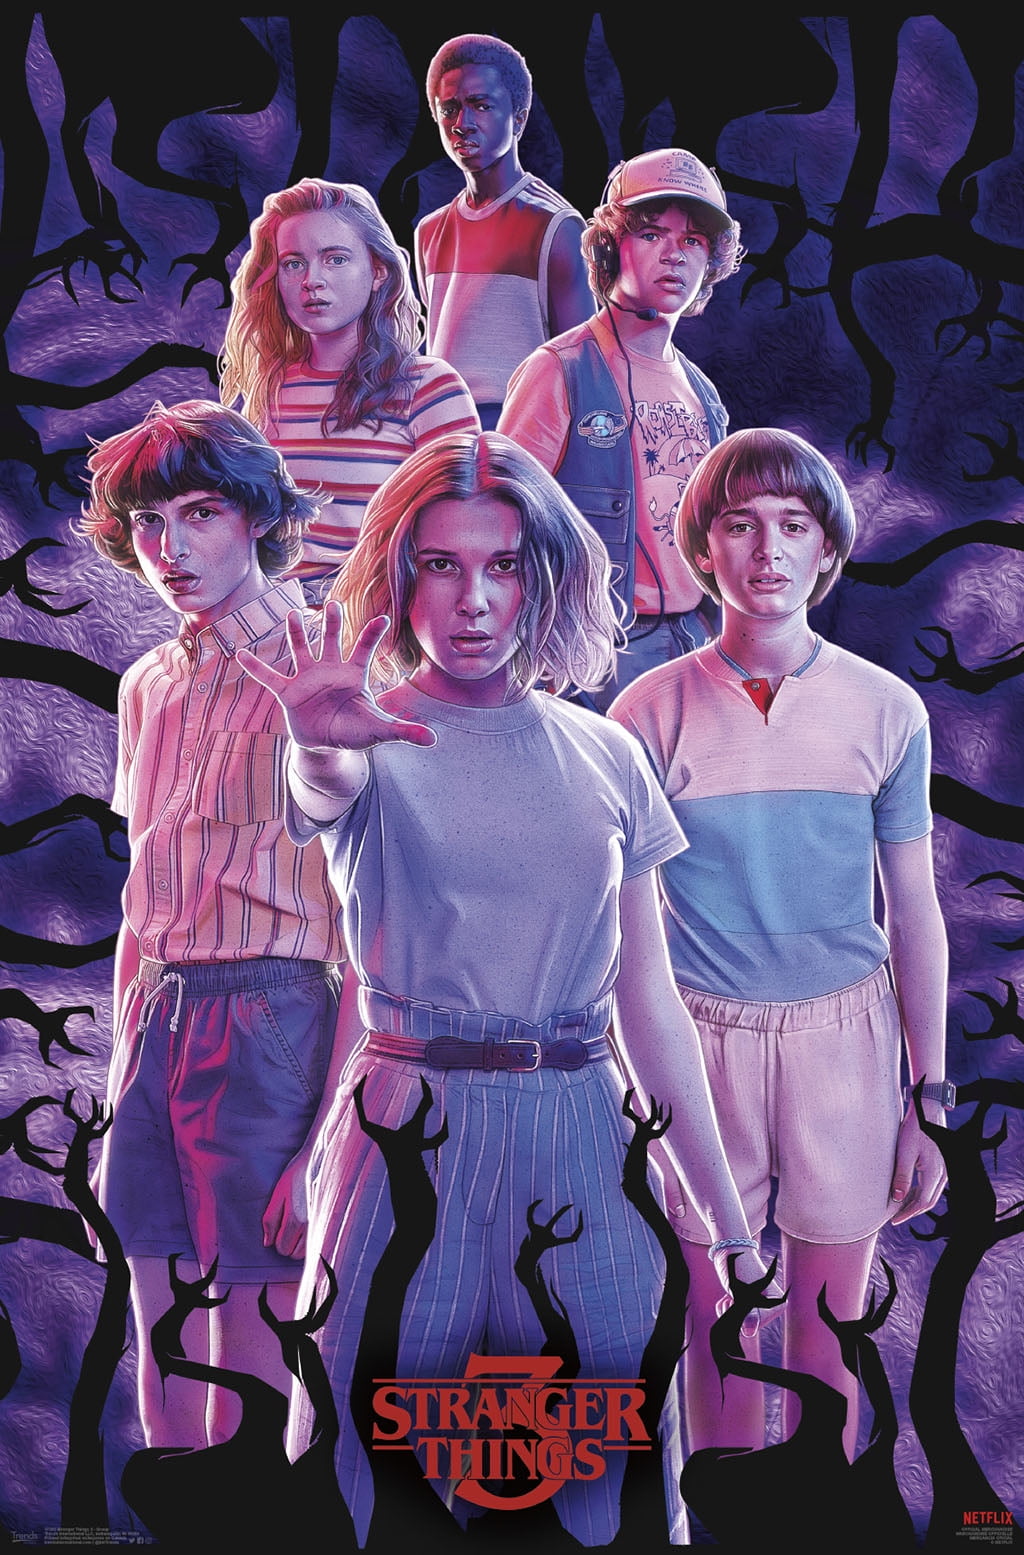 Three Posters STRANGER THINGS POSTERS COLLECTOR SET Season 1, 2, and 3 